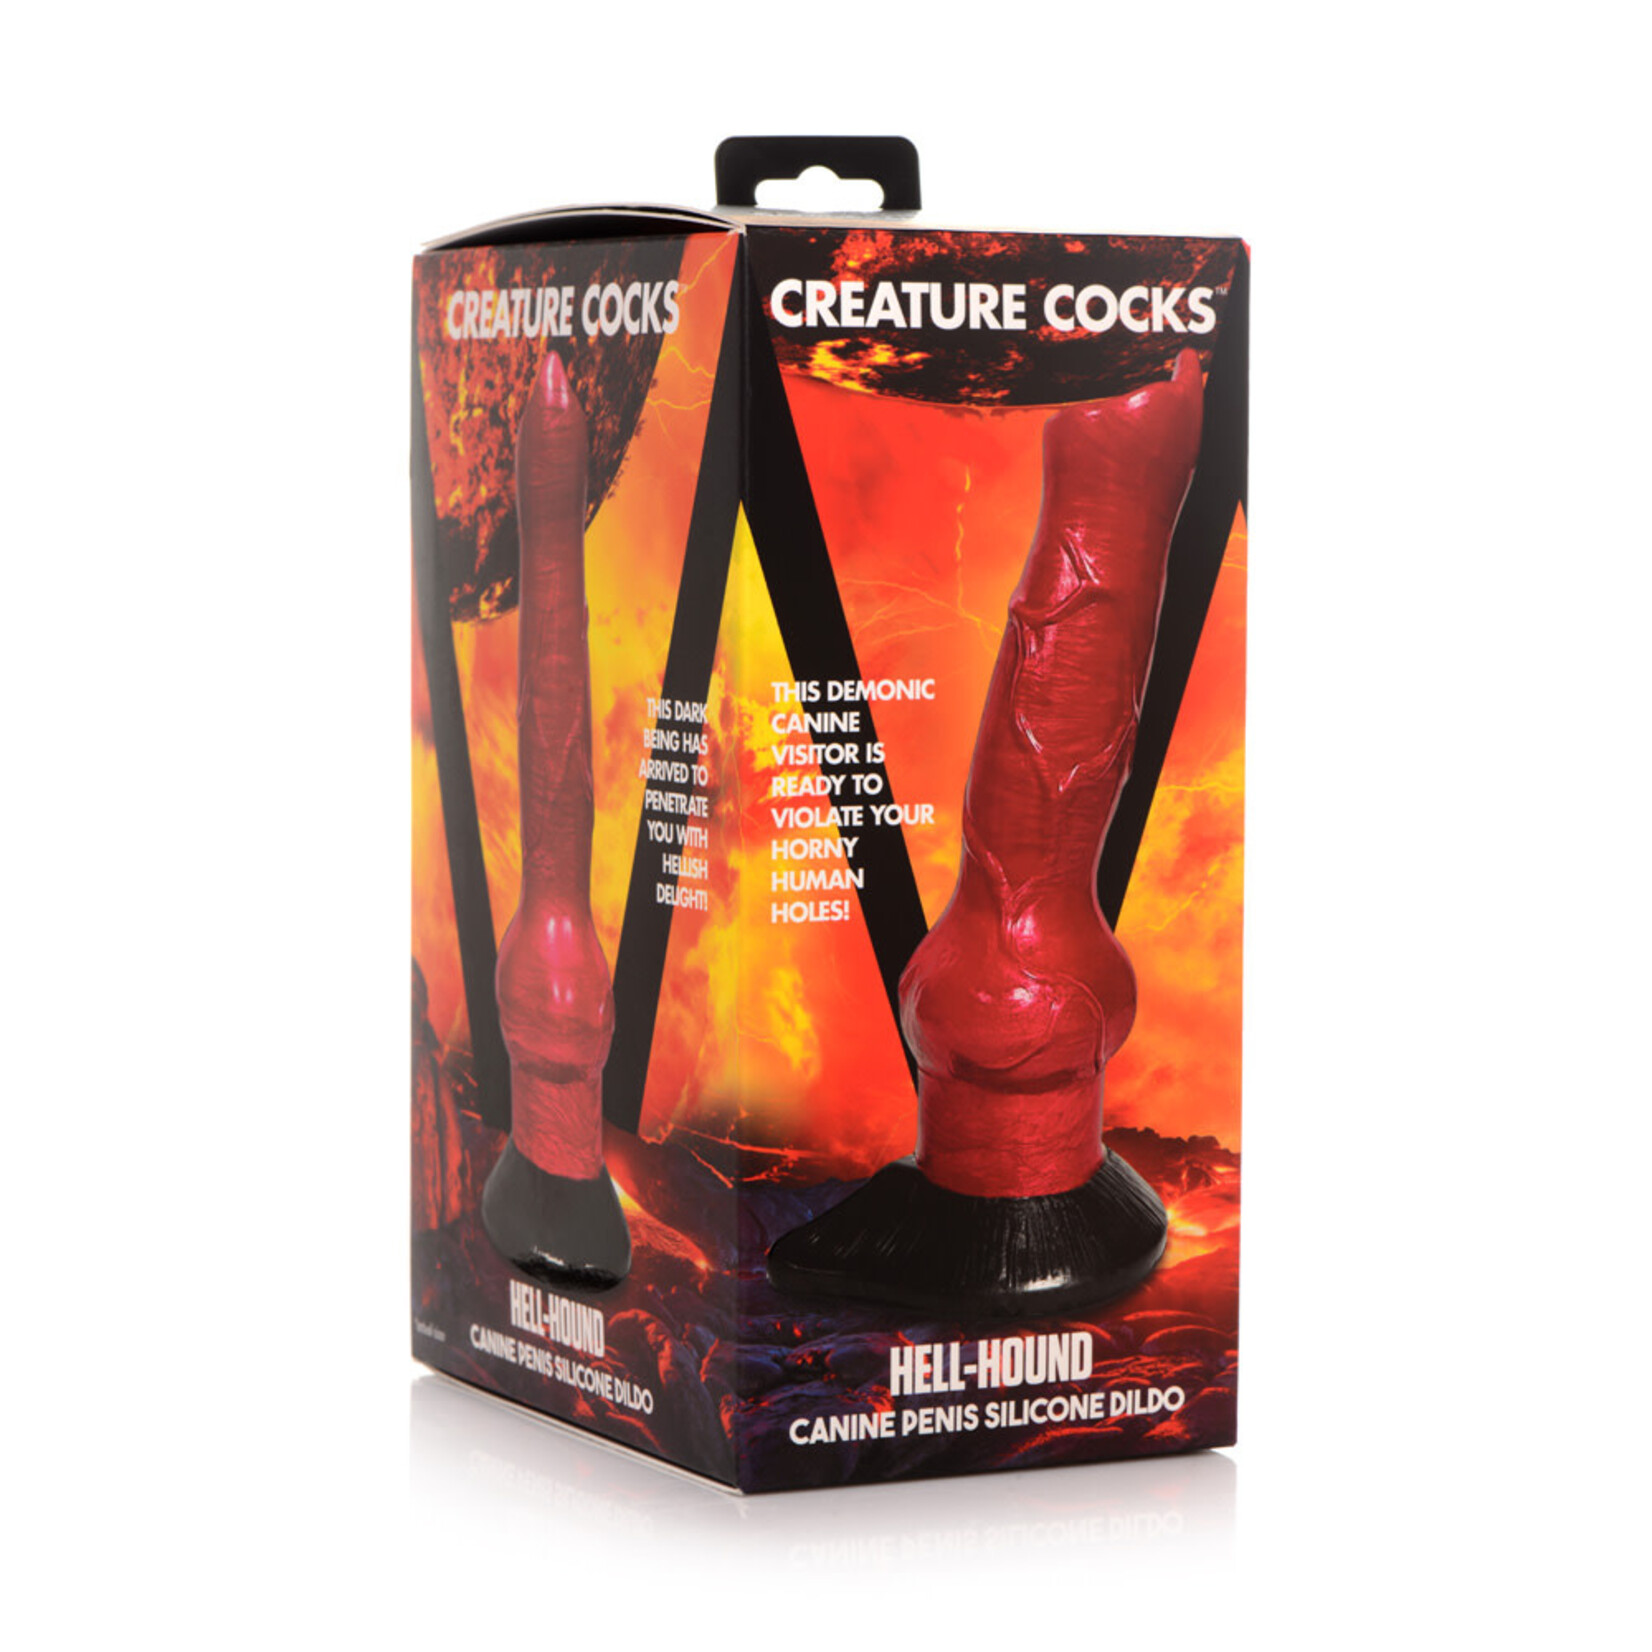 XR BRANDS CREATURE COCKS - HELL-HOUND CANINE PENIS SILICONE DILDO